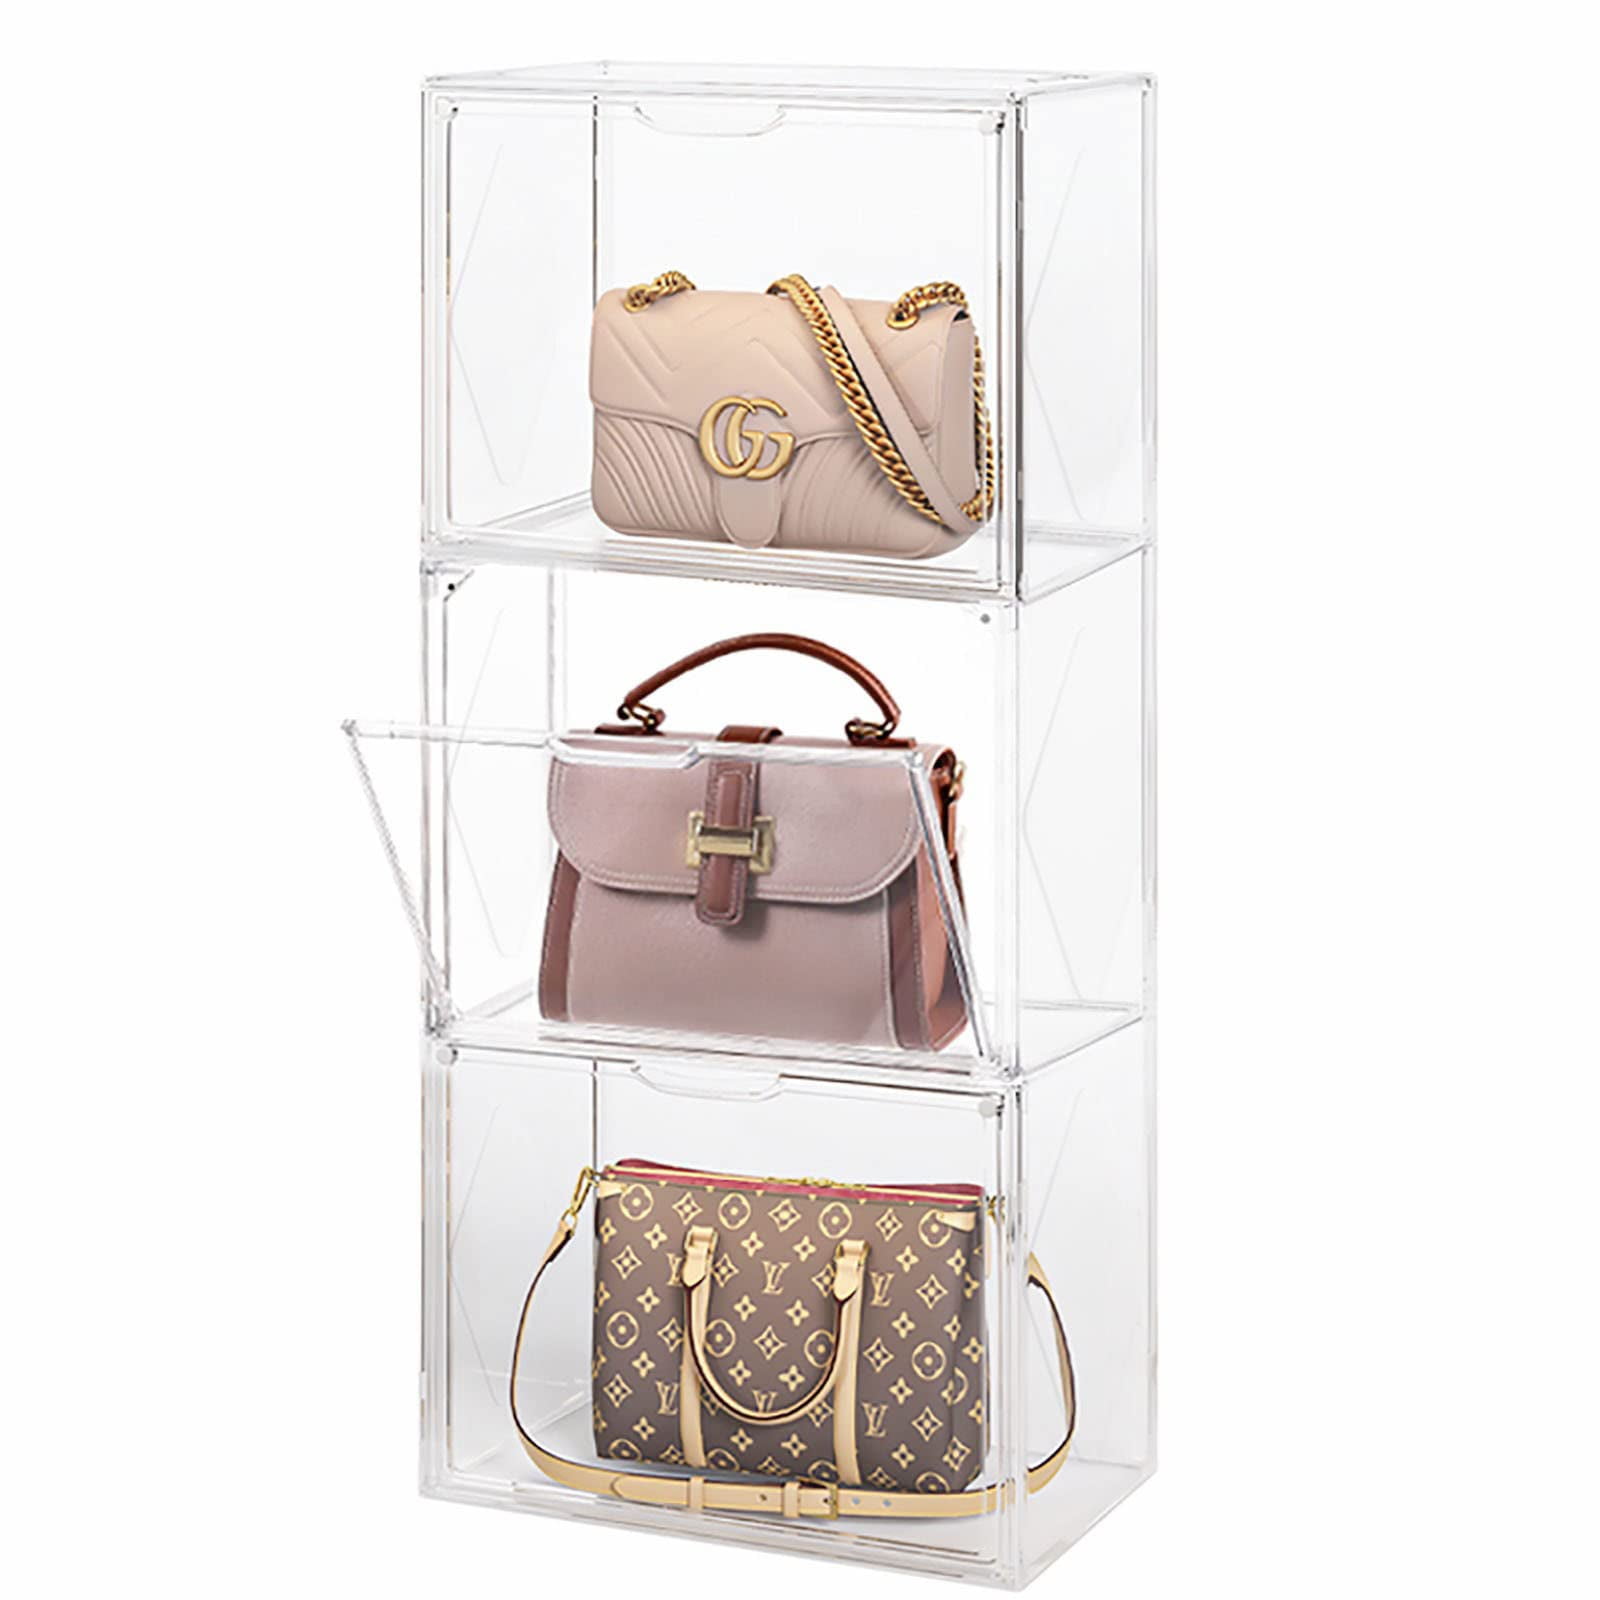  MSHOMELY Clear Purse Storage Organizer for Closet, 3Packs  Handbag Storage Organizer, Acrylic Display Case for Purse/Handbag,  Stackable Bag Organizer with Magnetic Door for Wallet, Clutch, Hats, Toys :  Home & Kitchen